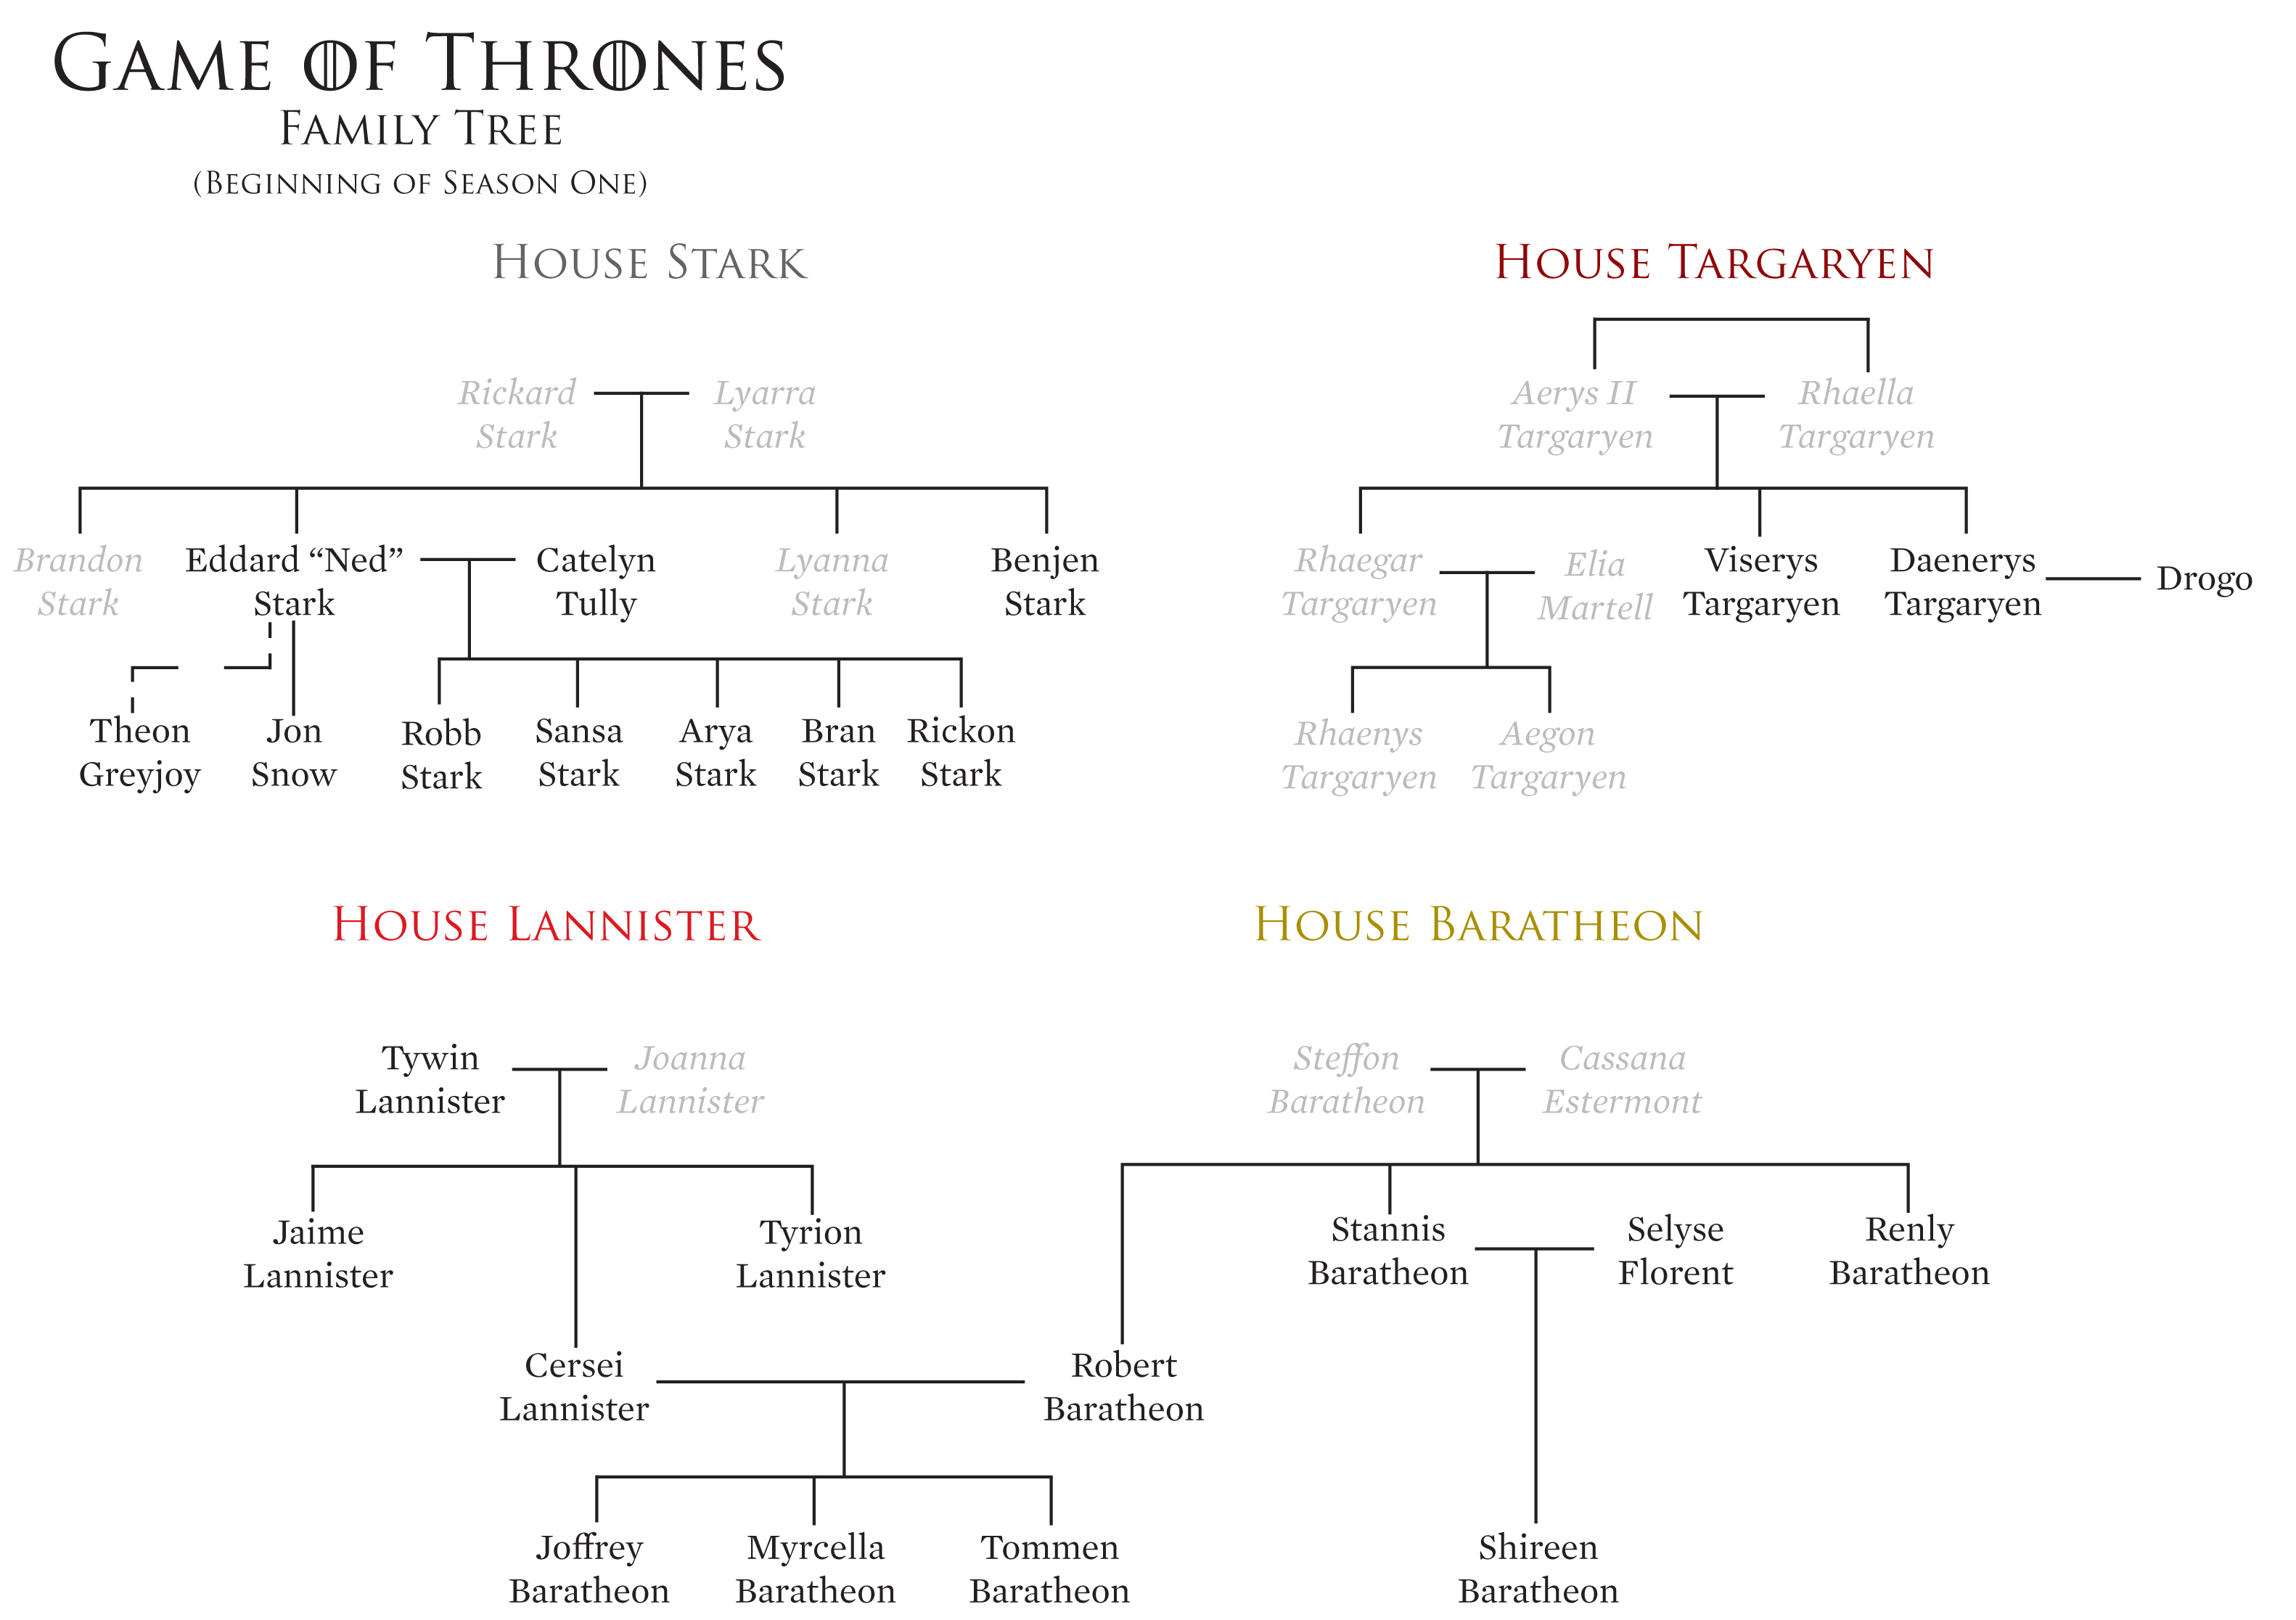 The complicated Game of Thrones family tree only adds more and more twists and turns as the series goes on.